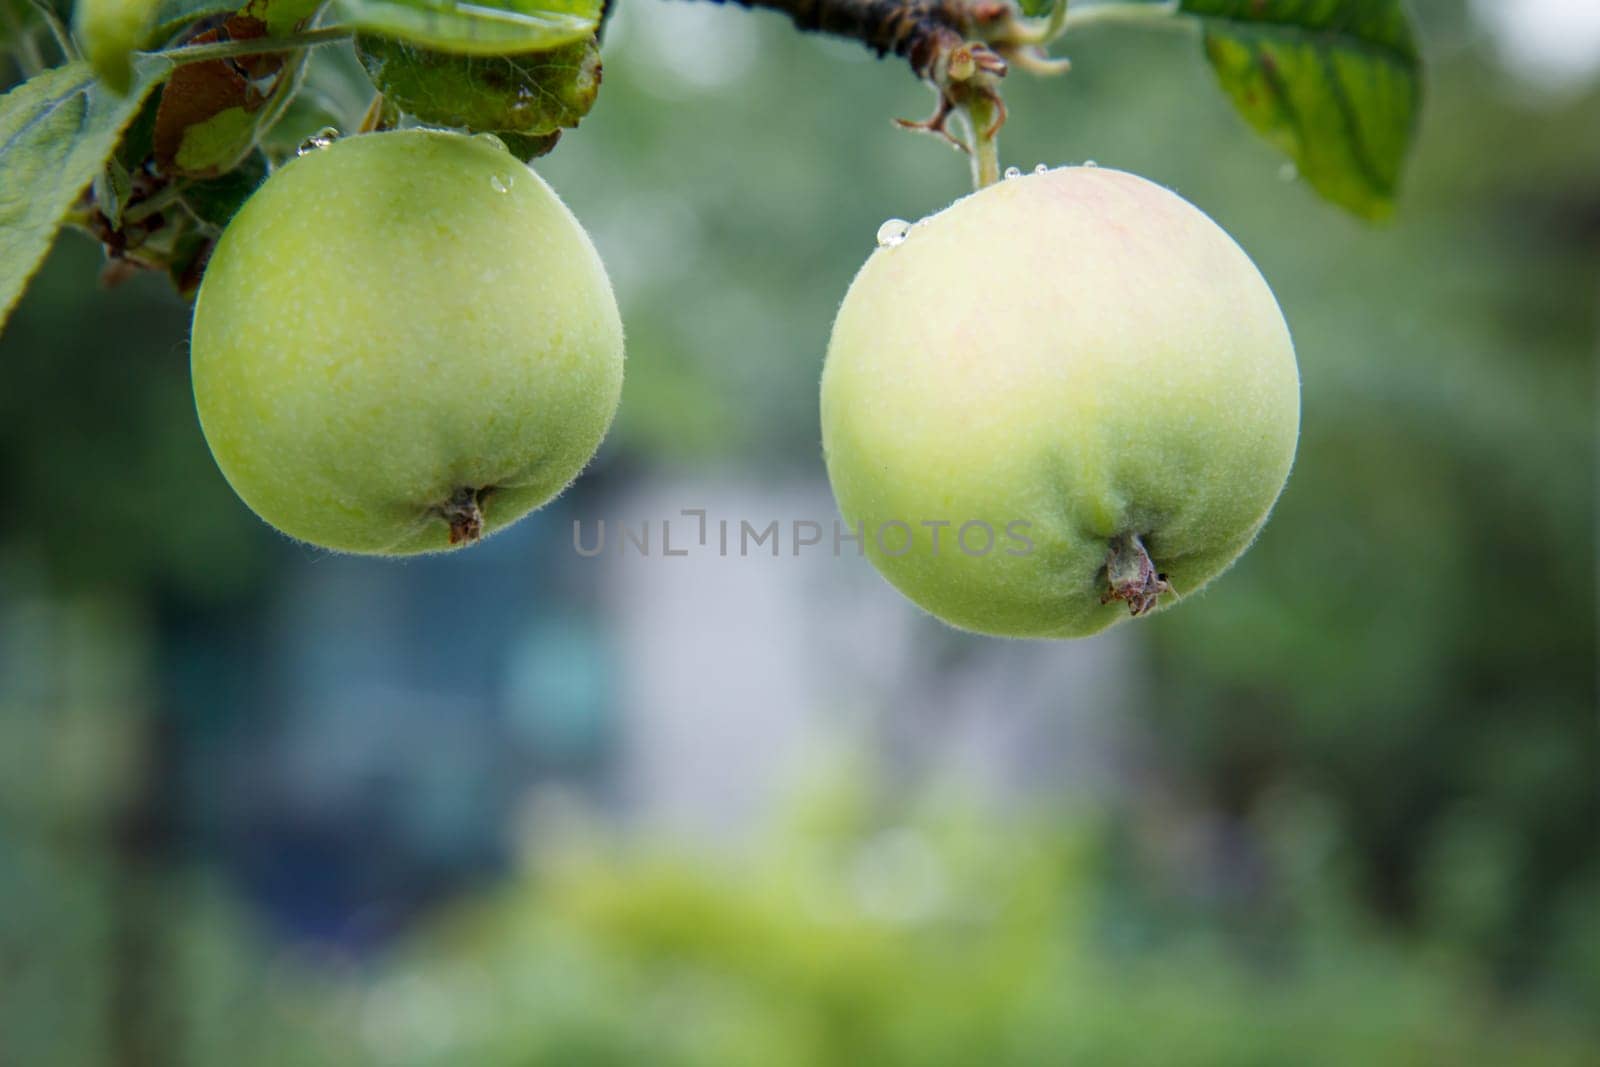 Close-up view of green unripe apples on the tree in the garden in summer day with natural blurred background. Shallow depth of field.